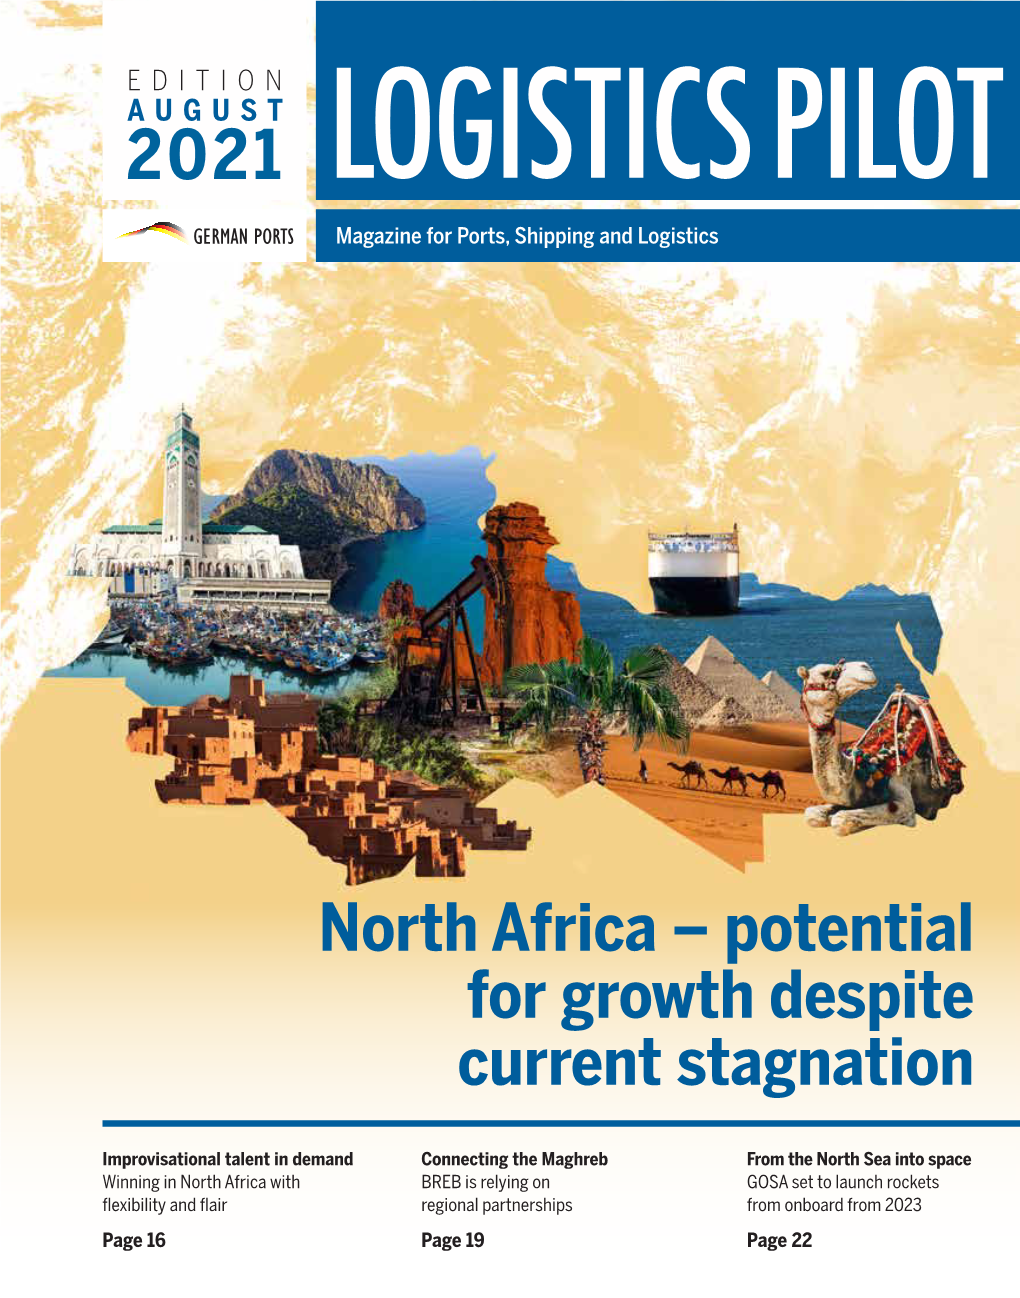 North Africa – Potential for Growth Despite Current Stagnation